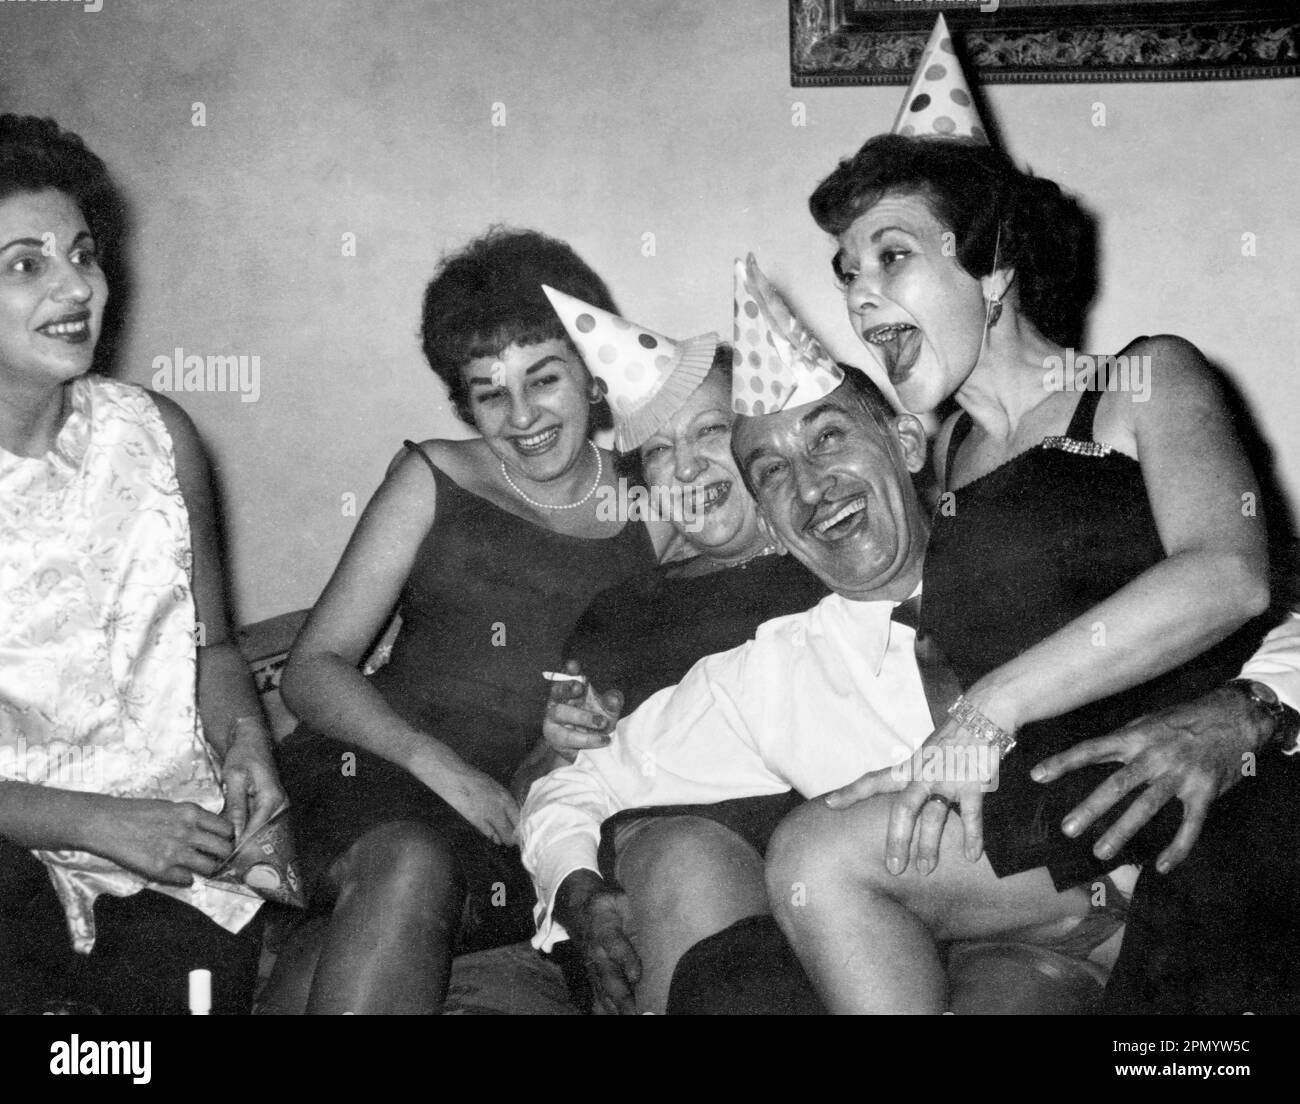 Circa 1960: adults celebrating at home with party hats, USA., original black and white vintage photograph. Stock Photo